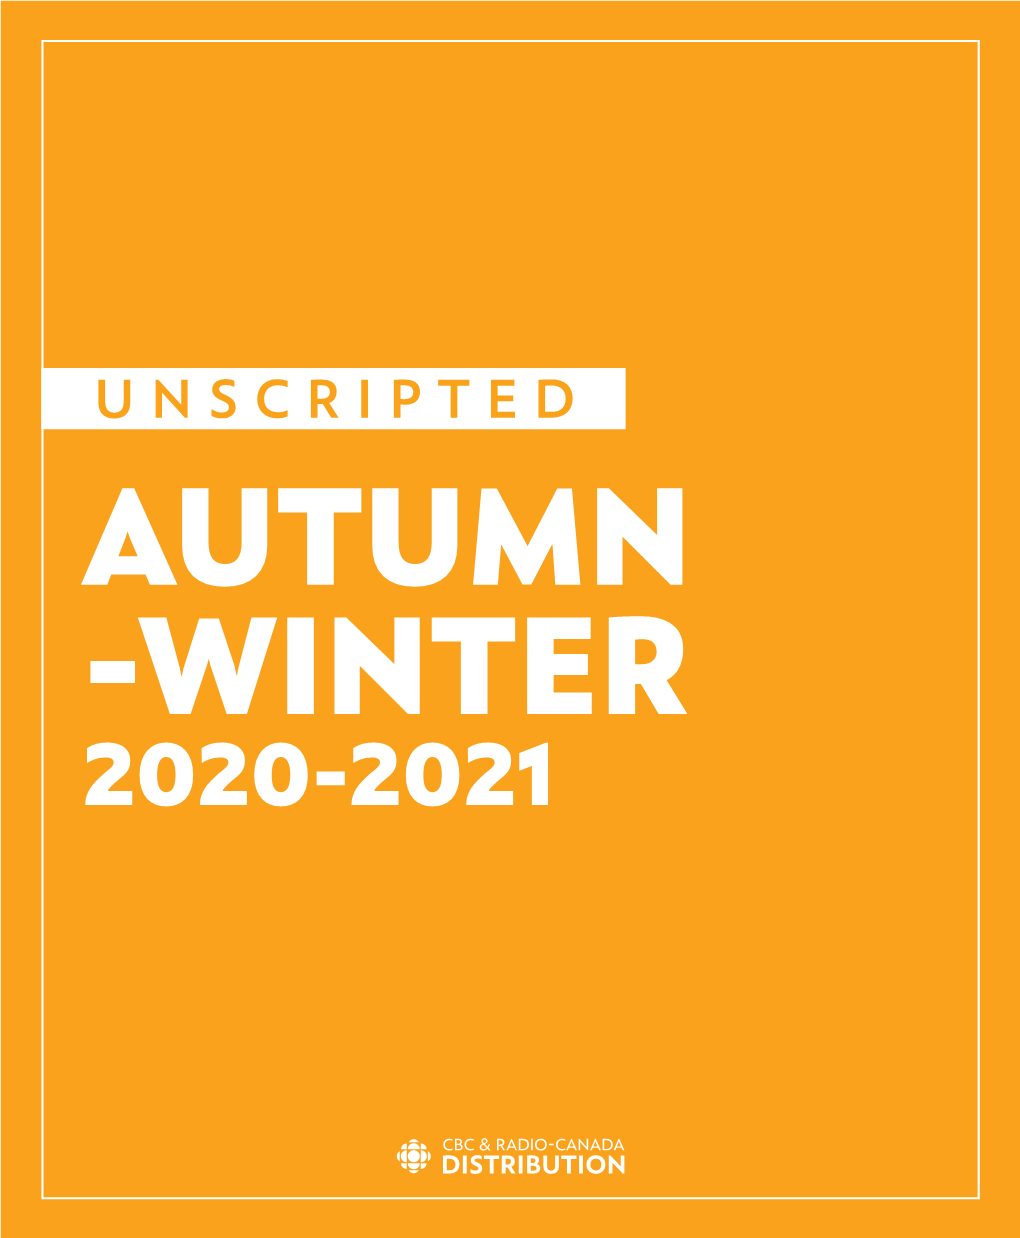 Unscripted Autumn -Winter 2020-2021 About